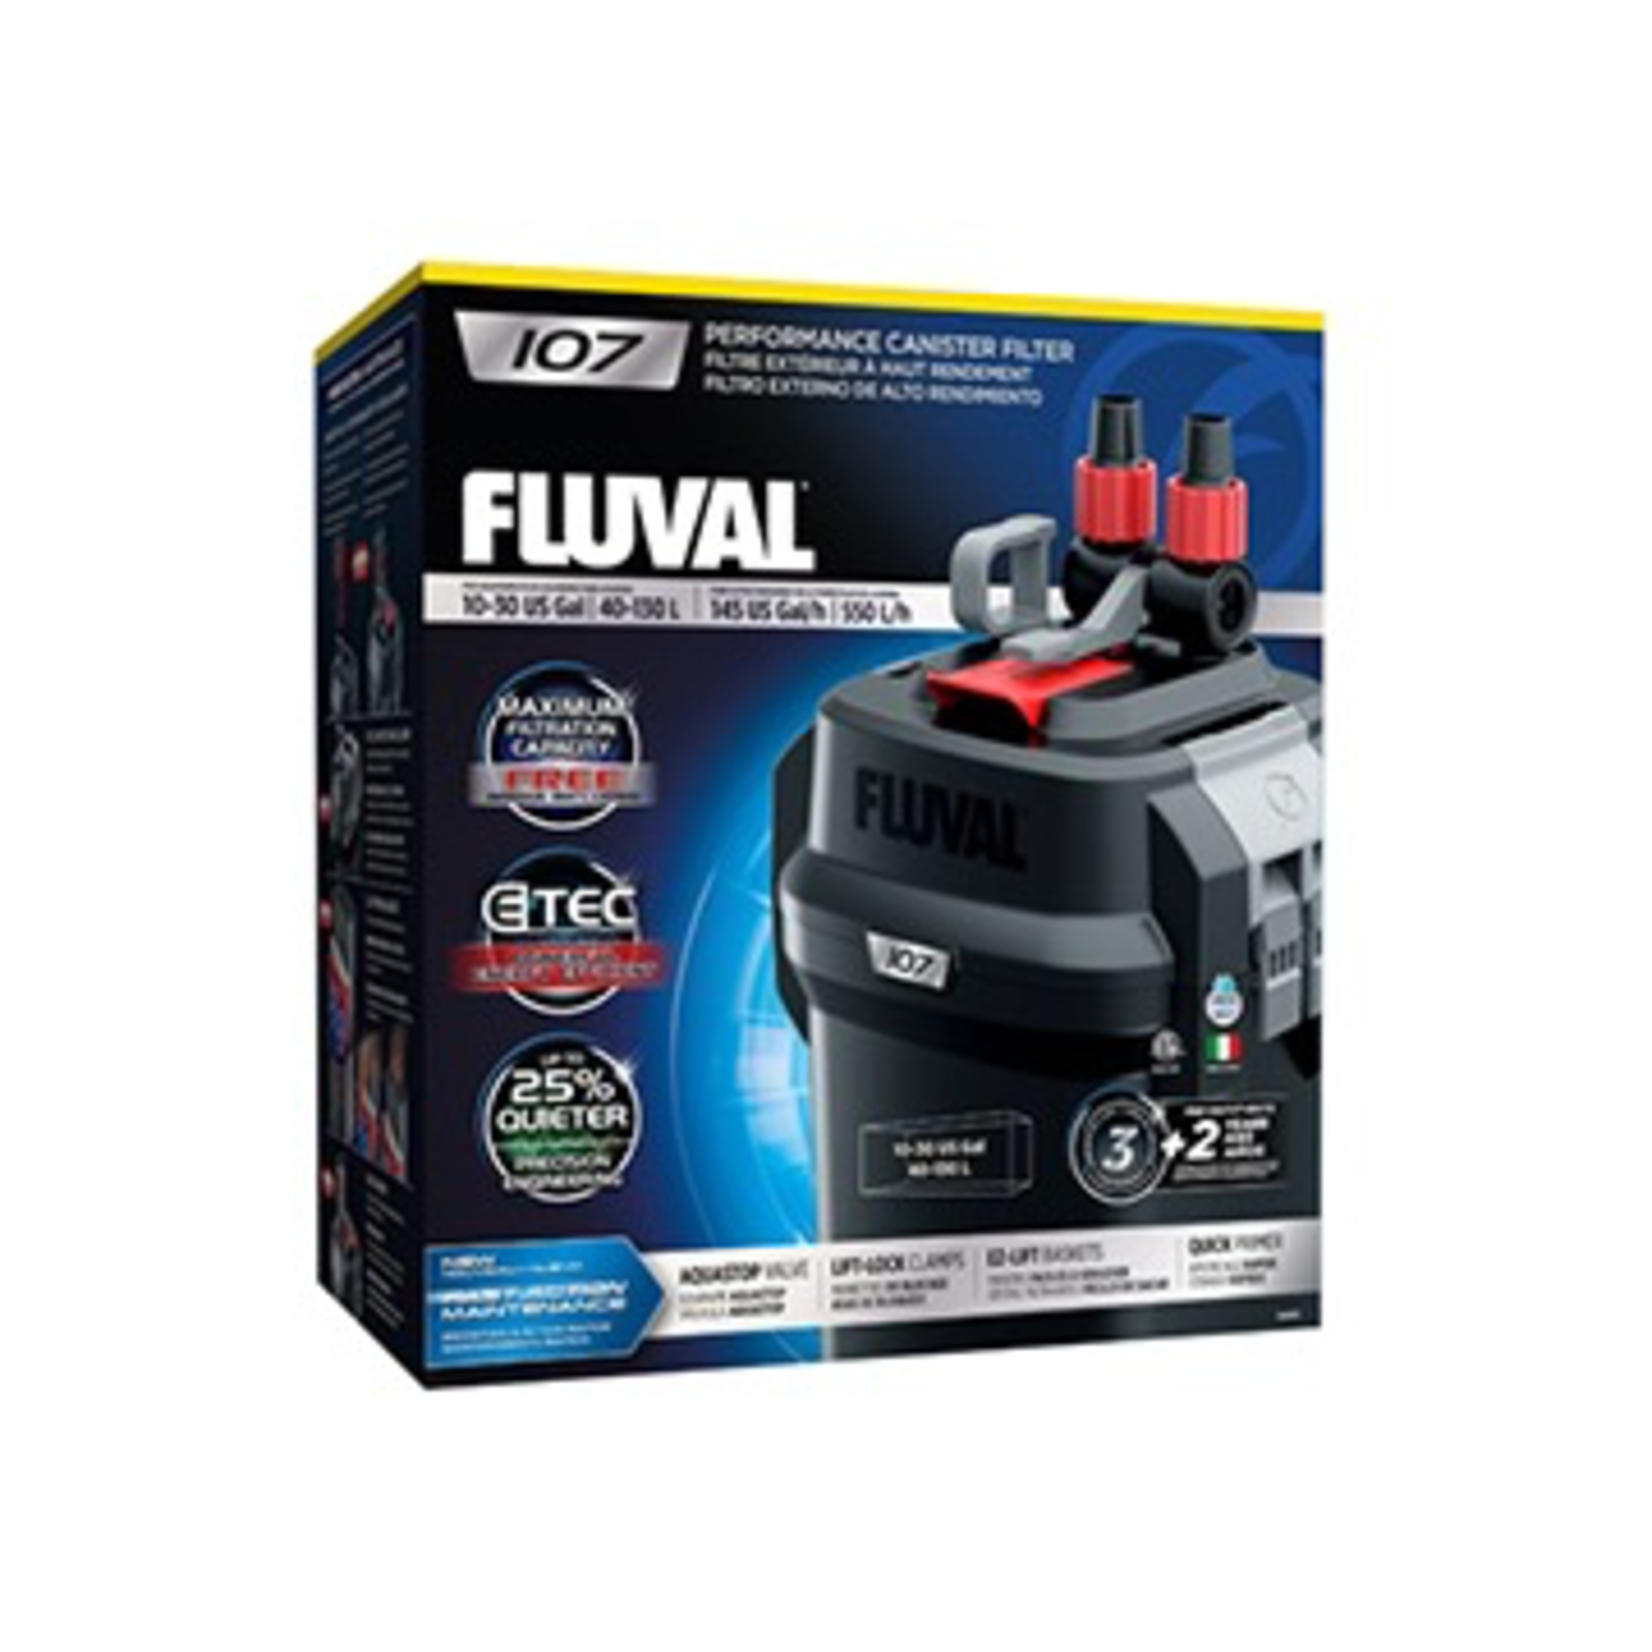 FLUVAL (W) Fluval 107 Performance Canister Filter, up to 130 L (30 US gal)